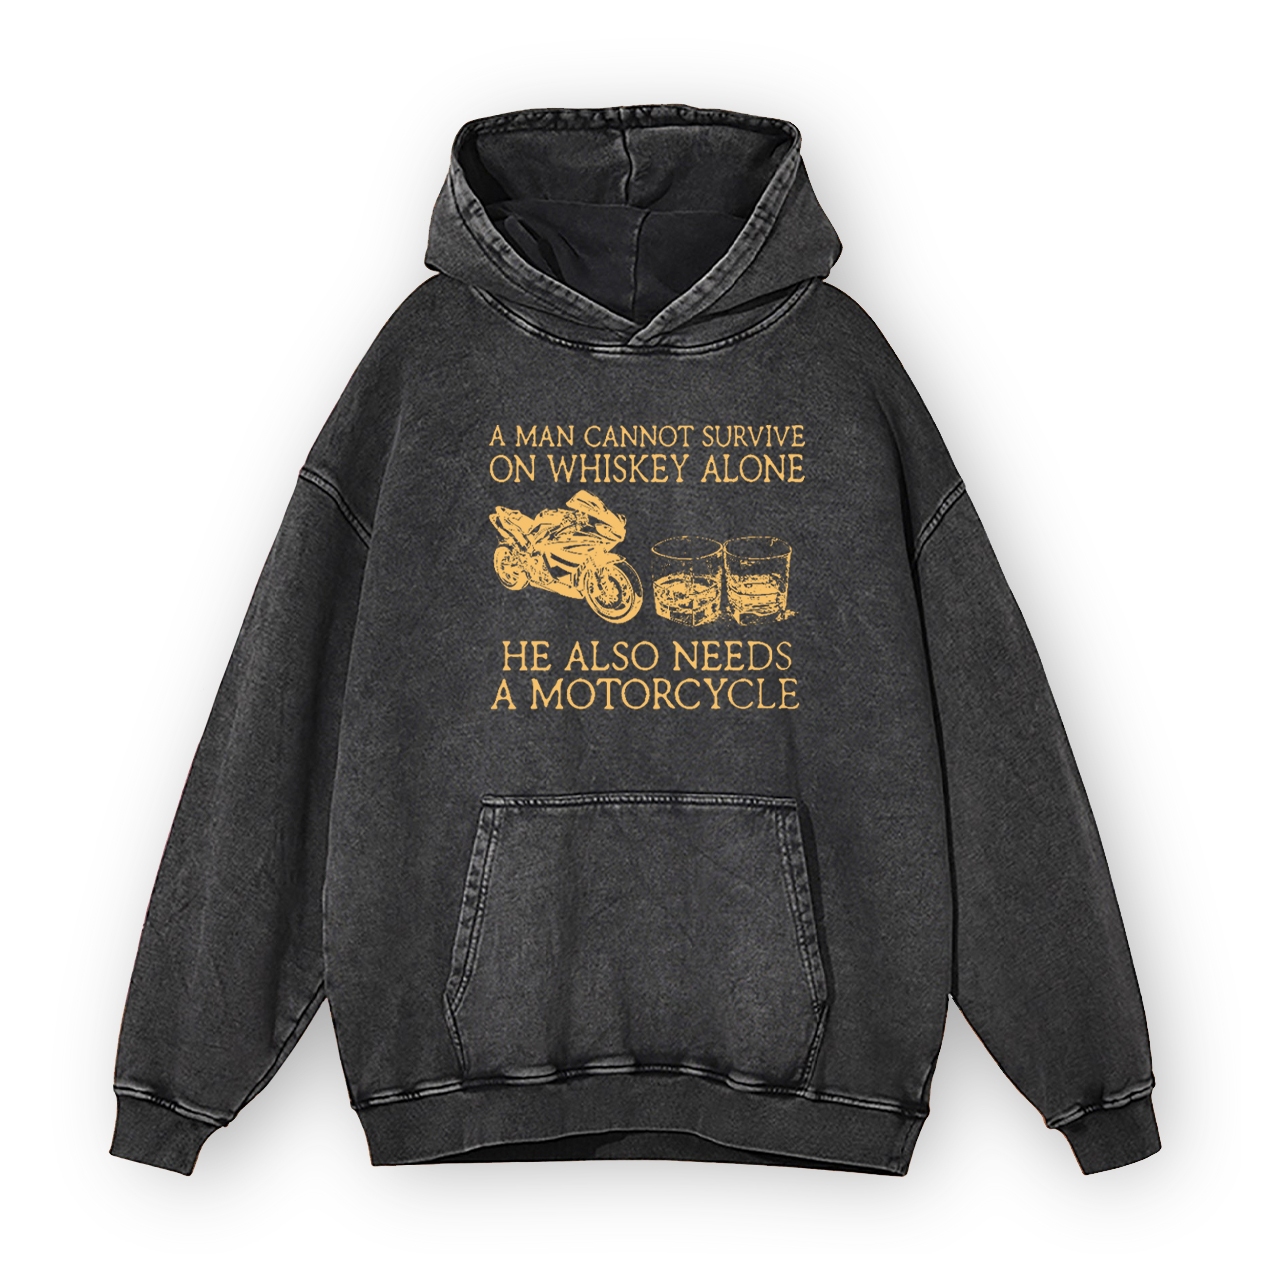 A Man Cannot Survive On Whiskey Alone He Also Needs A Motorcycle Garment-Dye Hoodies